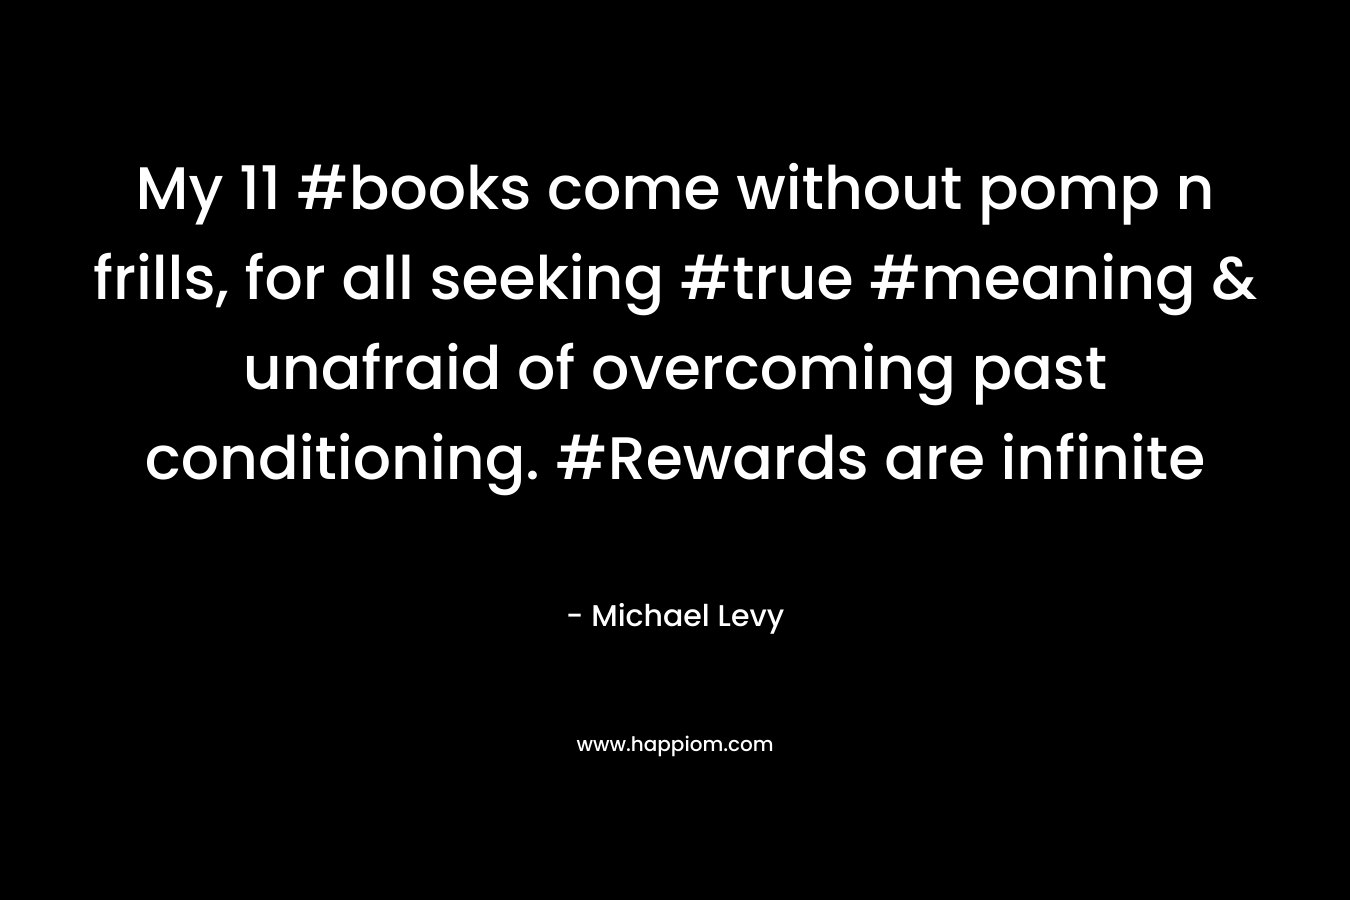 My 11 #books come without pomp n frills, for all seeking #true #meaning & unafraid of overcoming past conditioning. #Rewards are infinite – Michael Levy